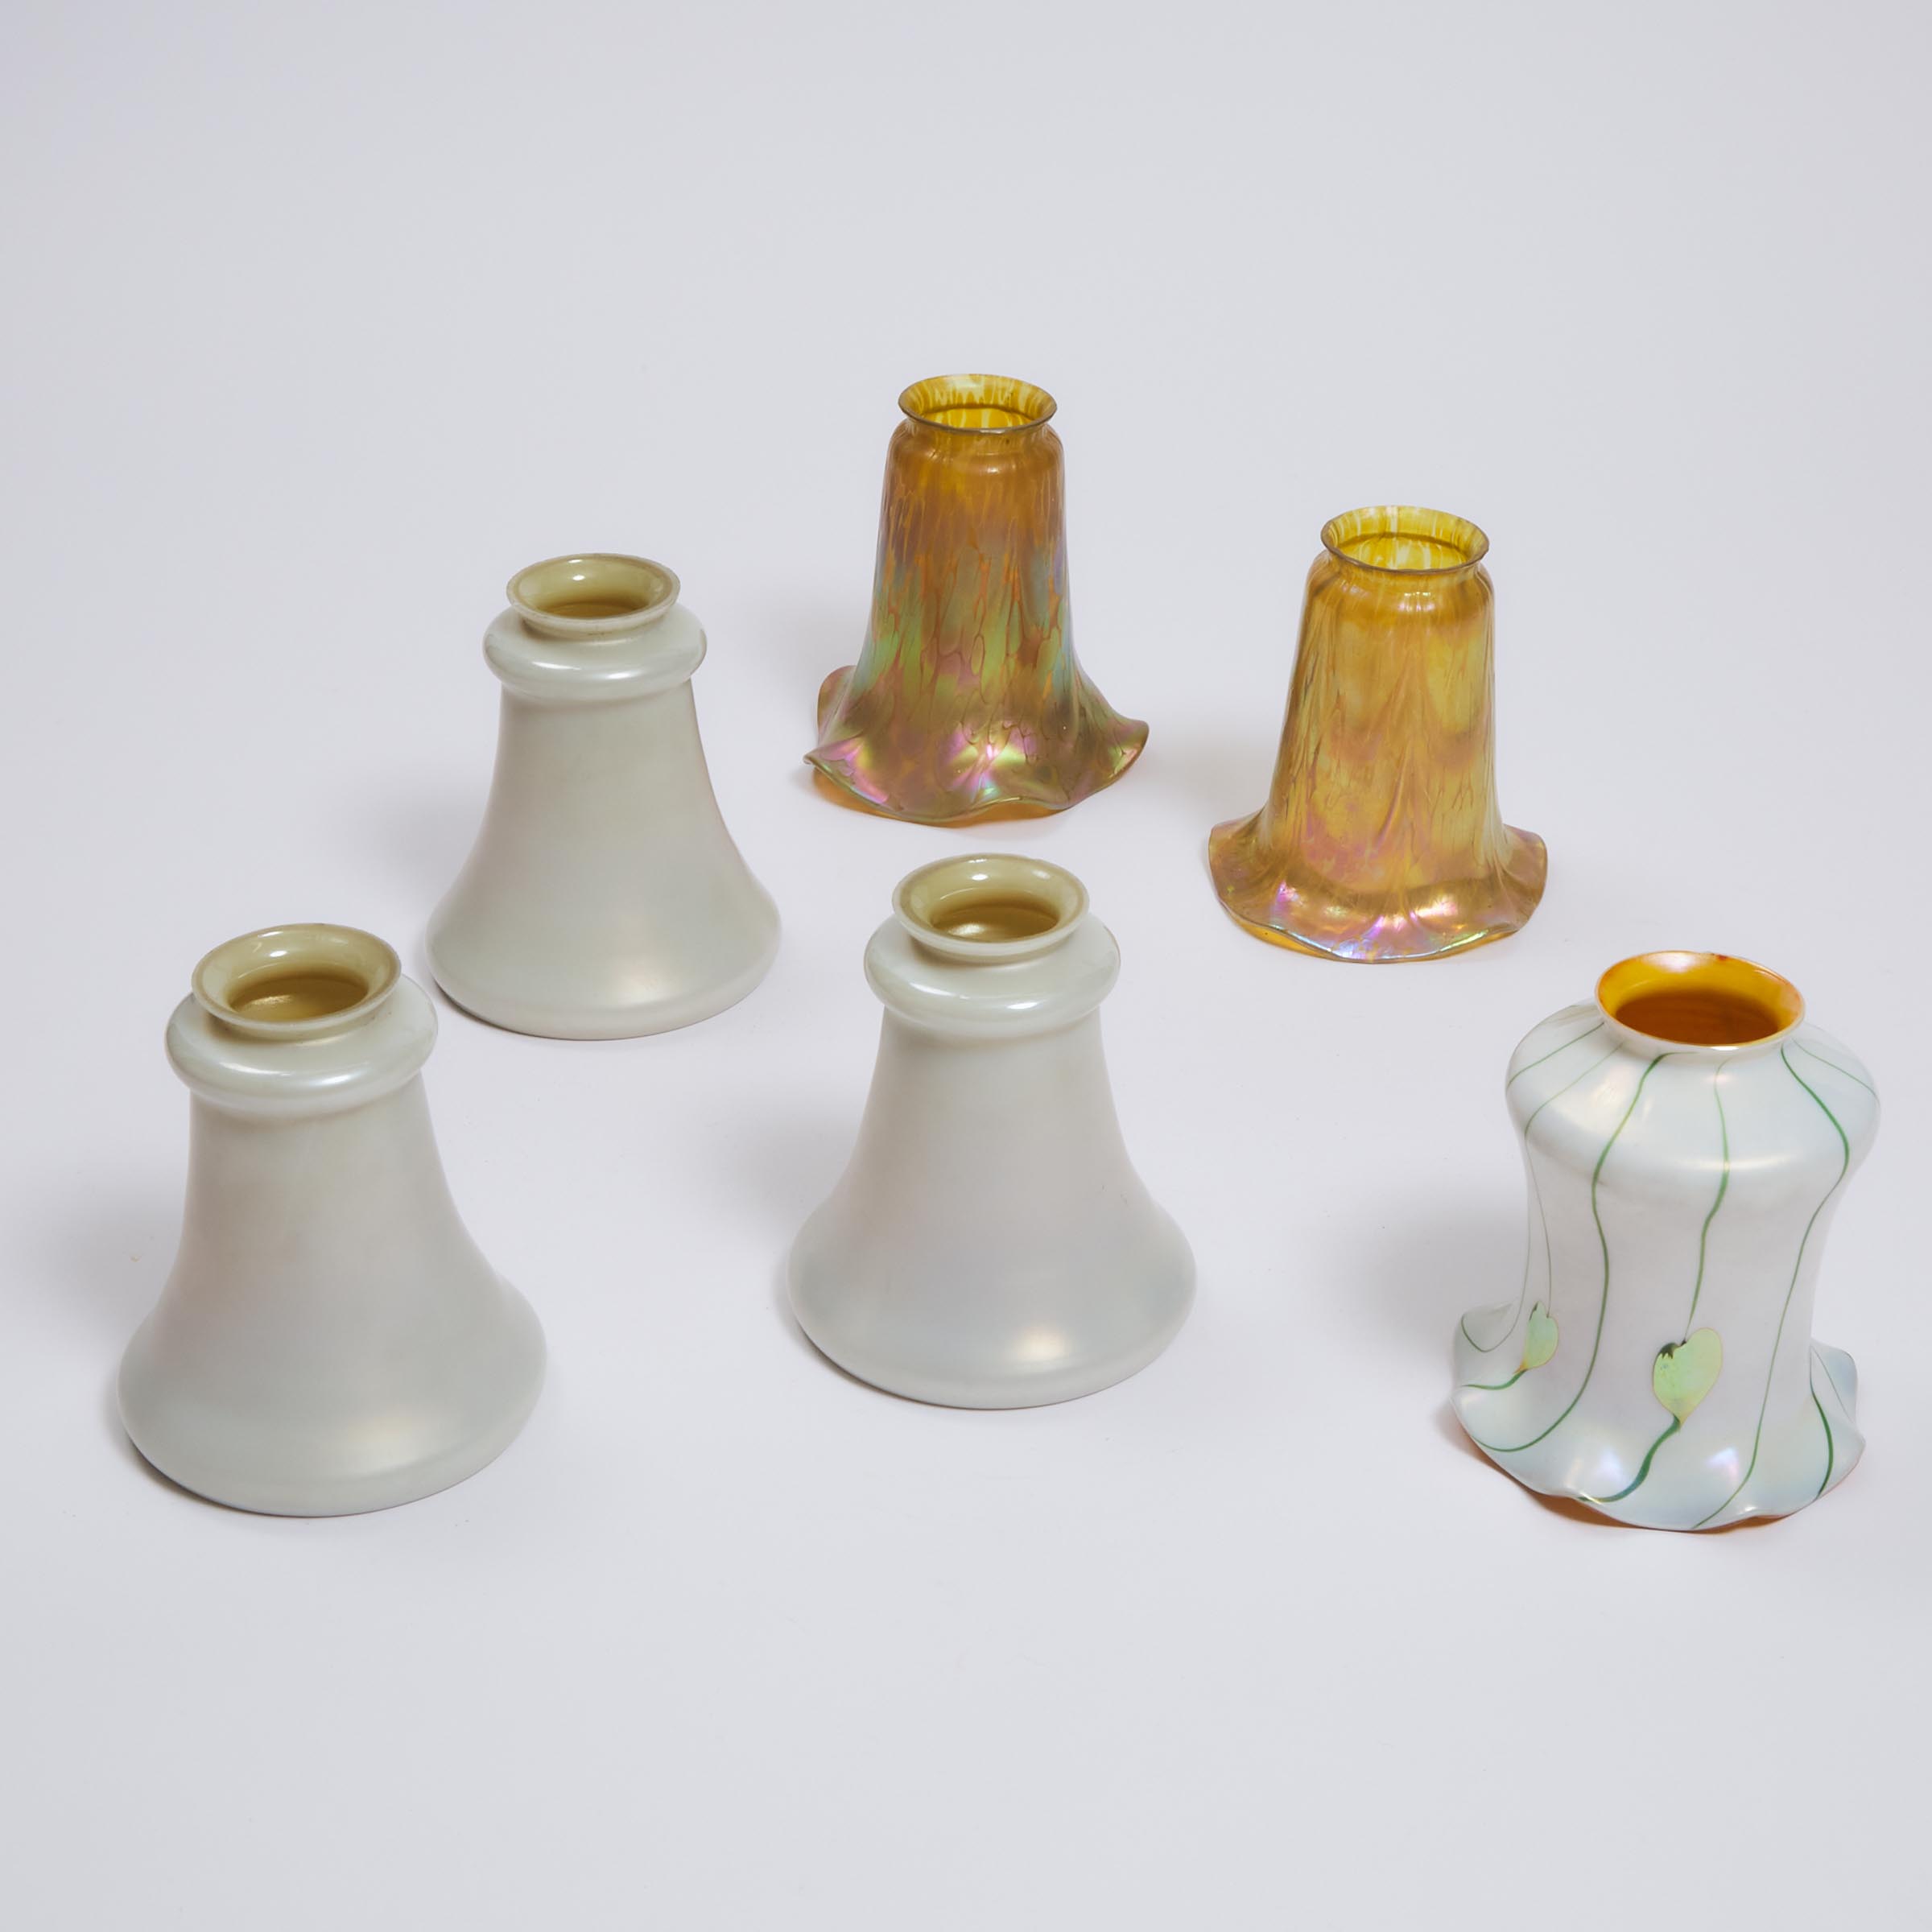 Six Various Iridescent and Calcite-Type Glass Shades, early 20th century